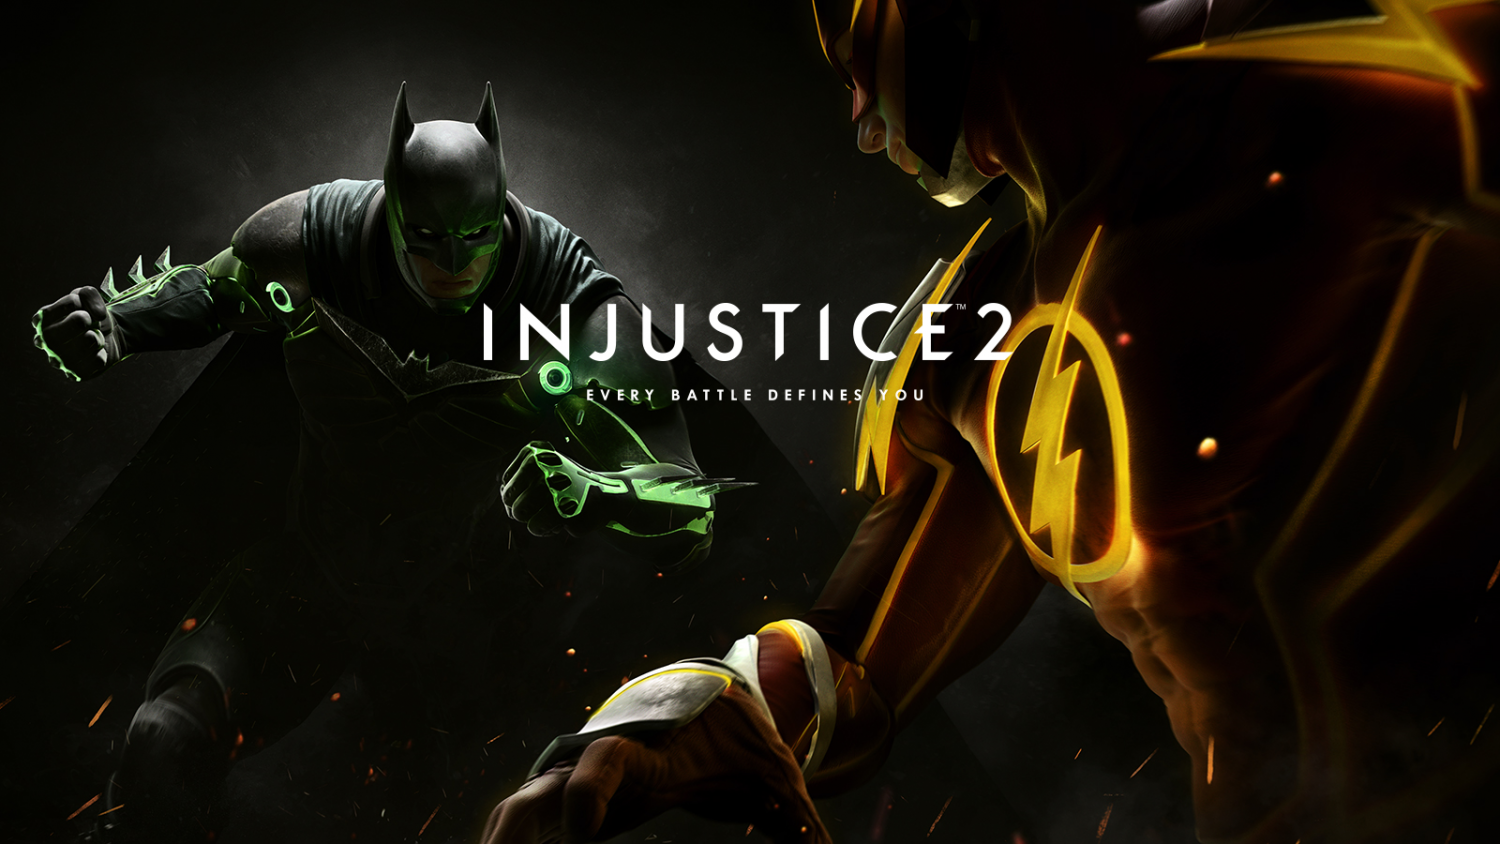 Official Injustice 2 banner.